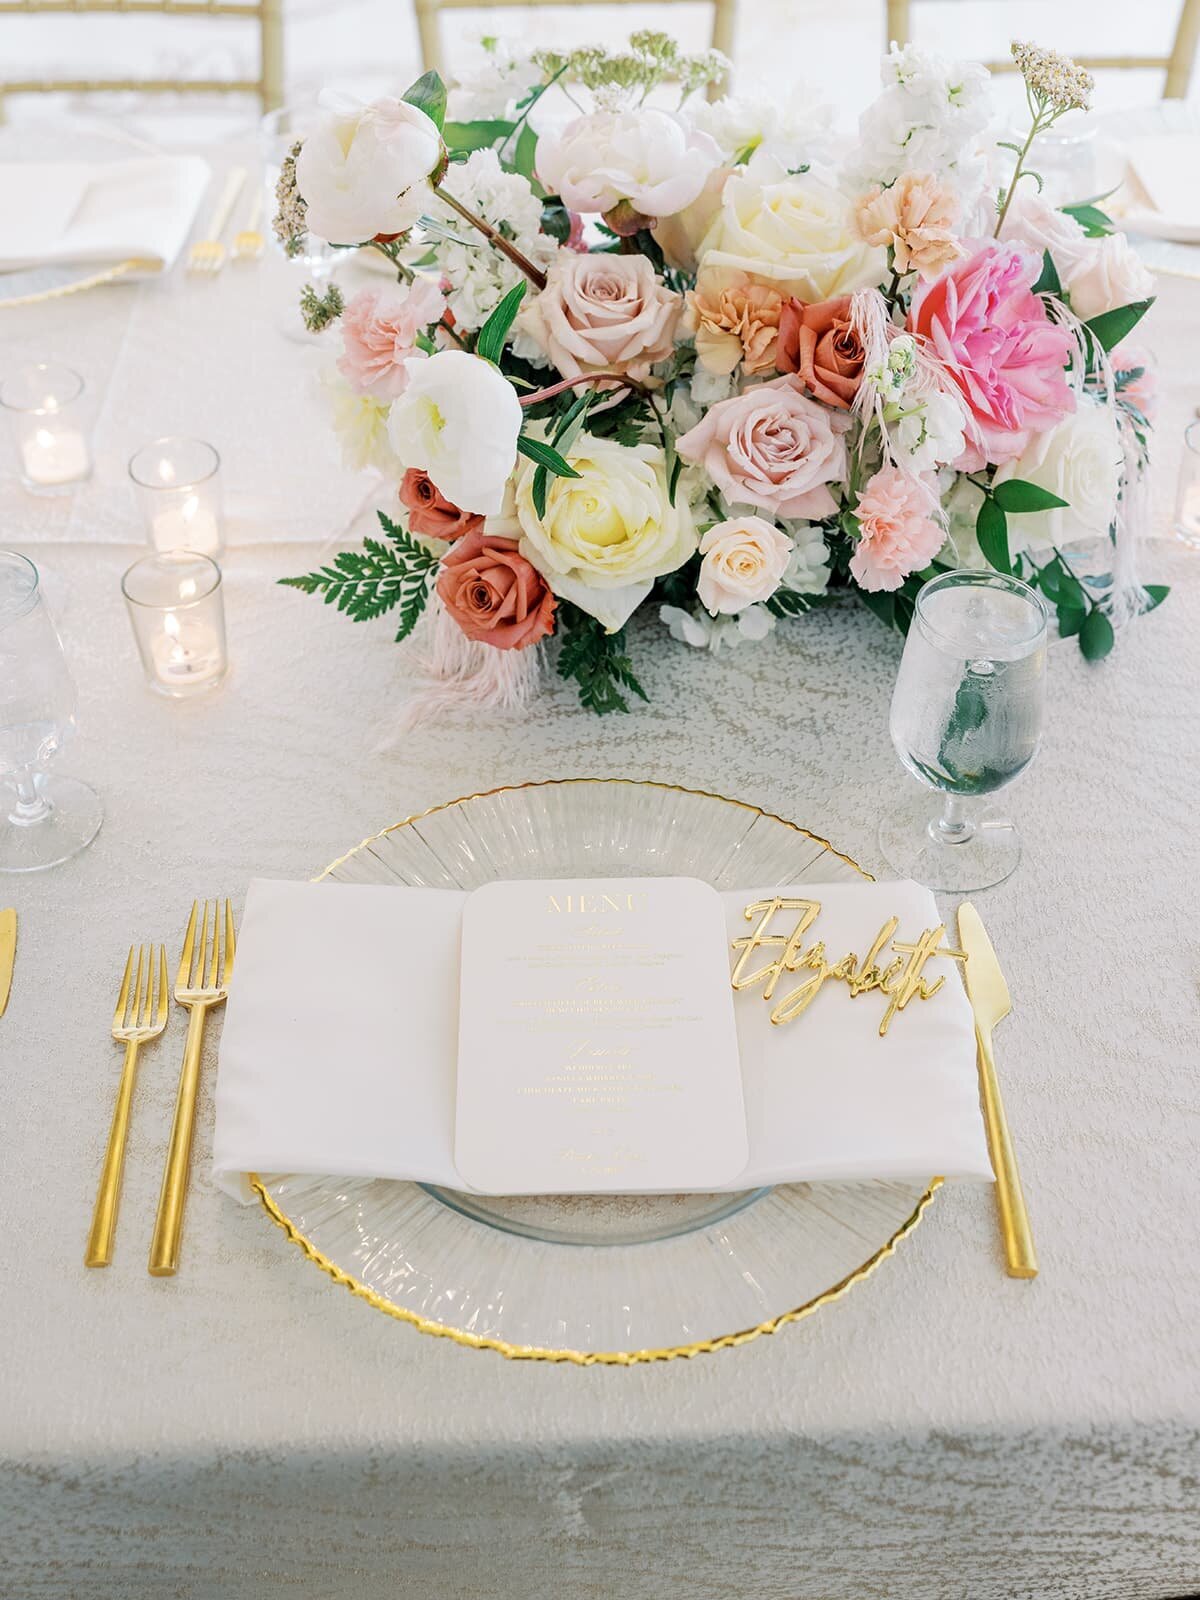 elegant table setting with bright pink bouquet and gold trim plates and silverware